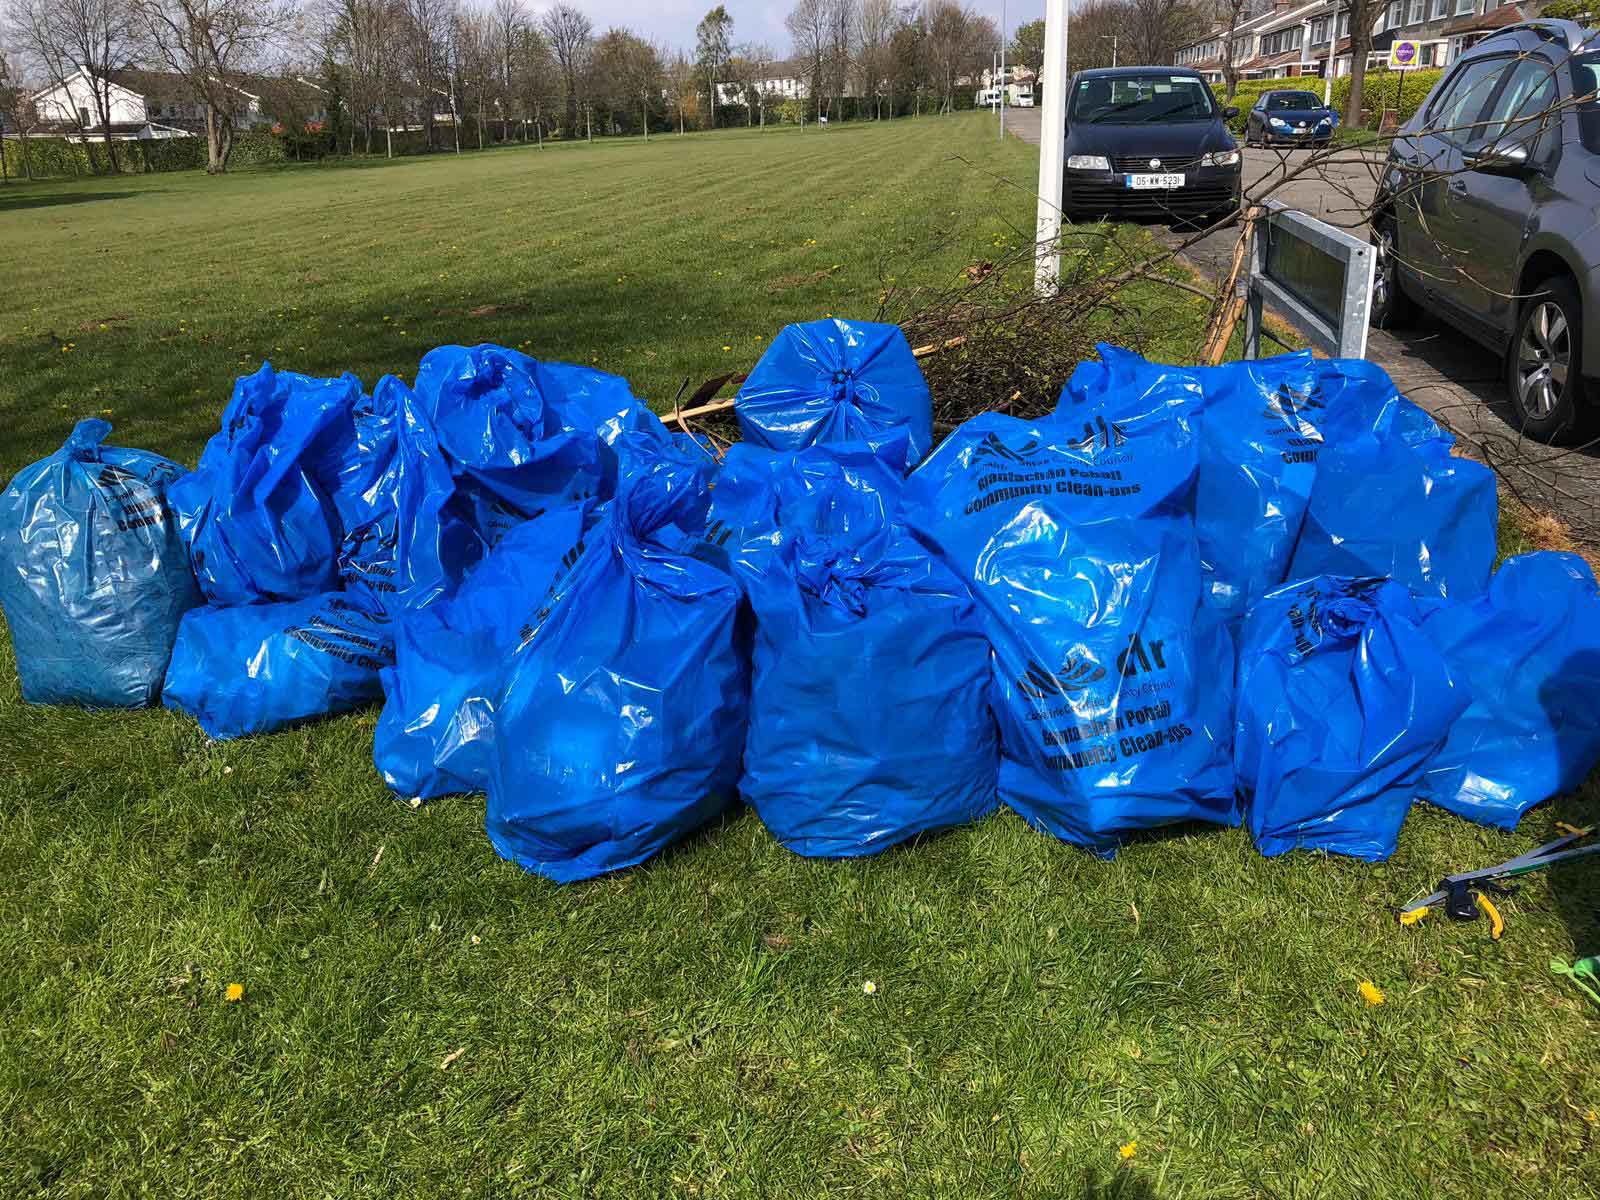 30 bags litter Clean up day April 19